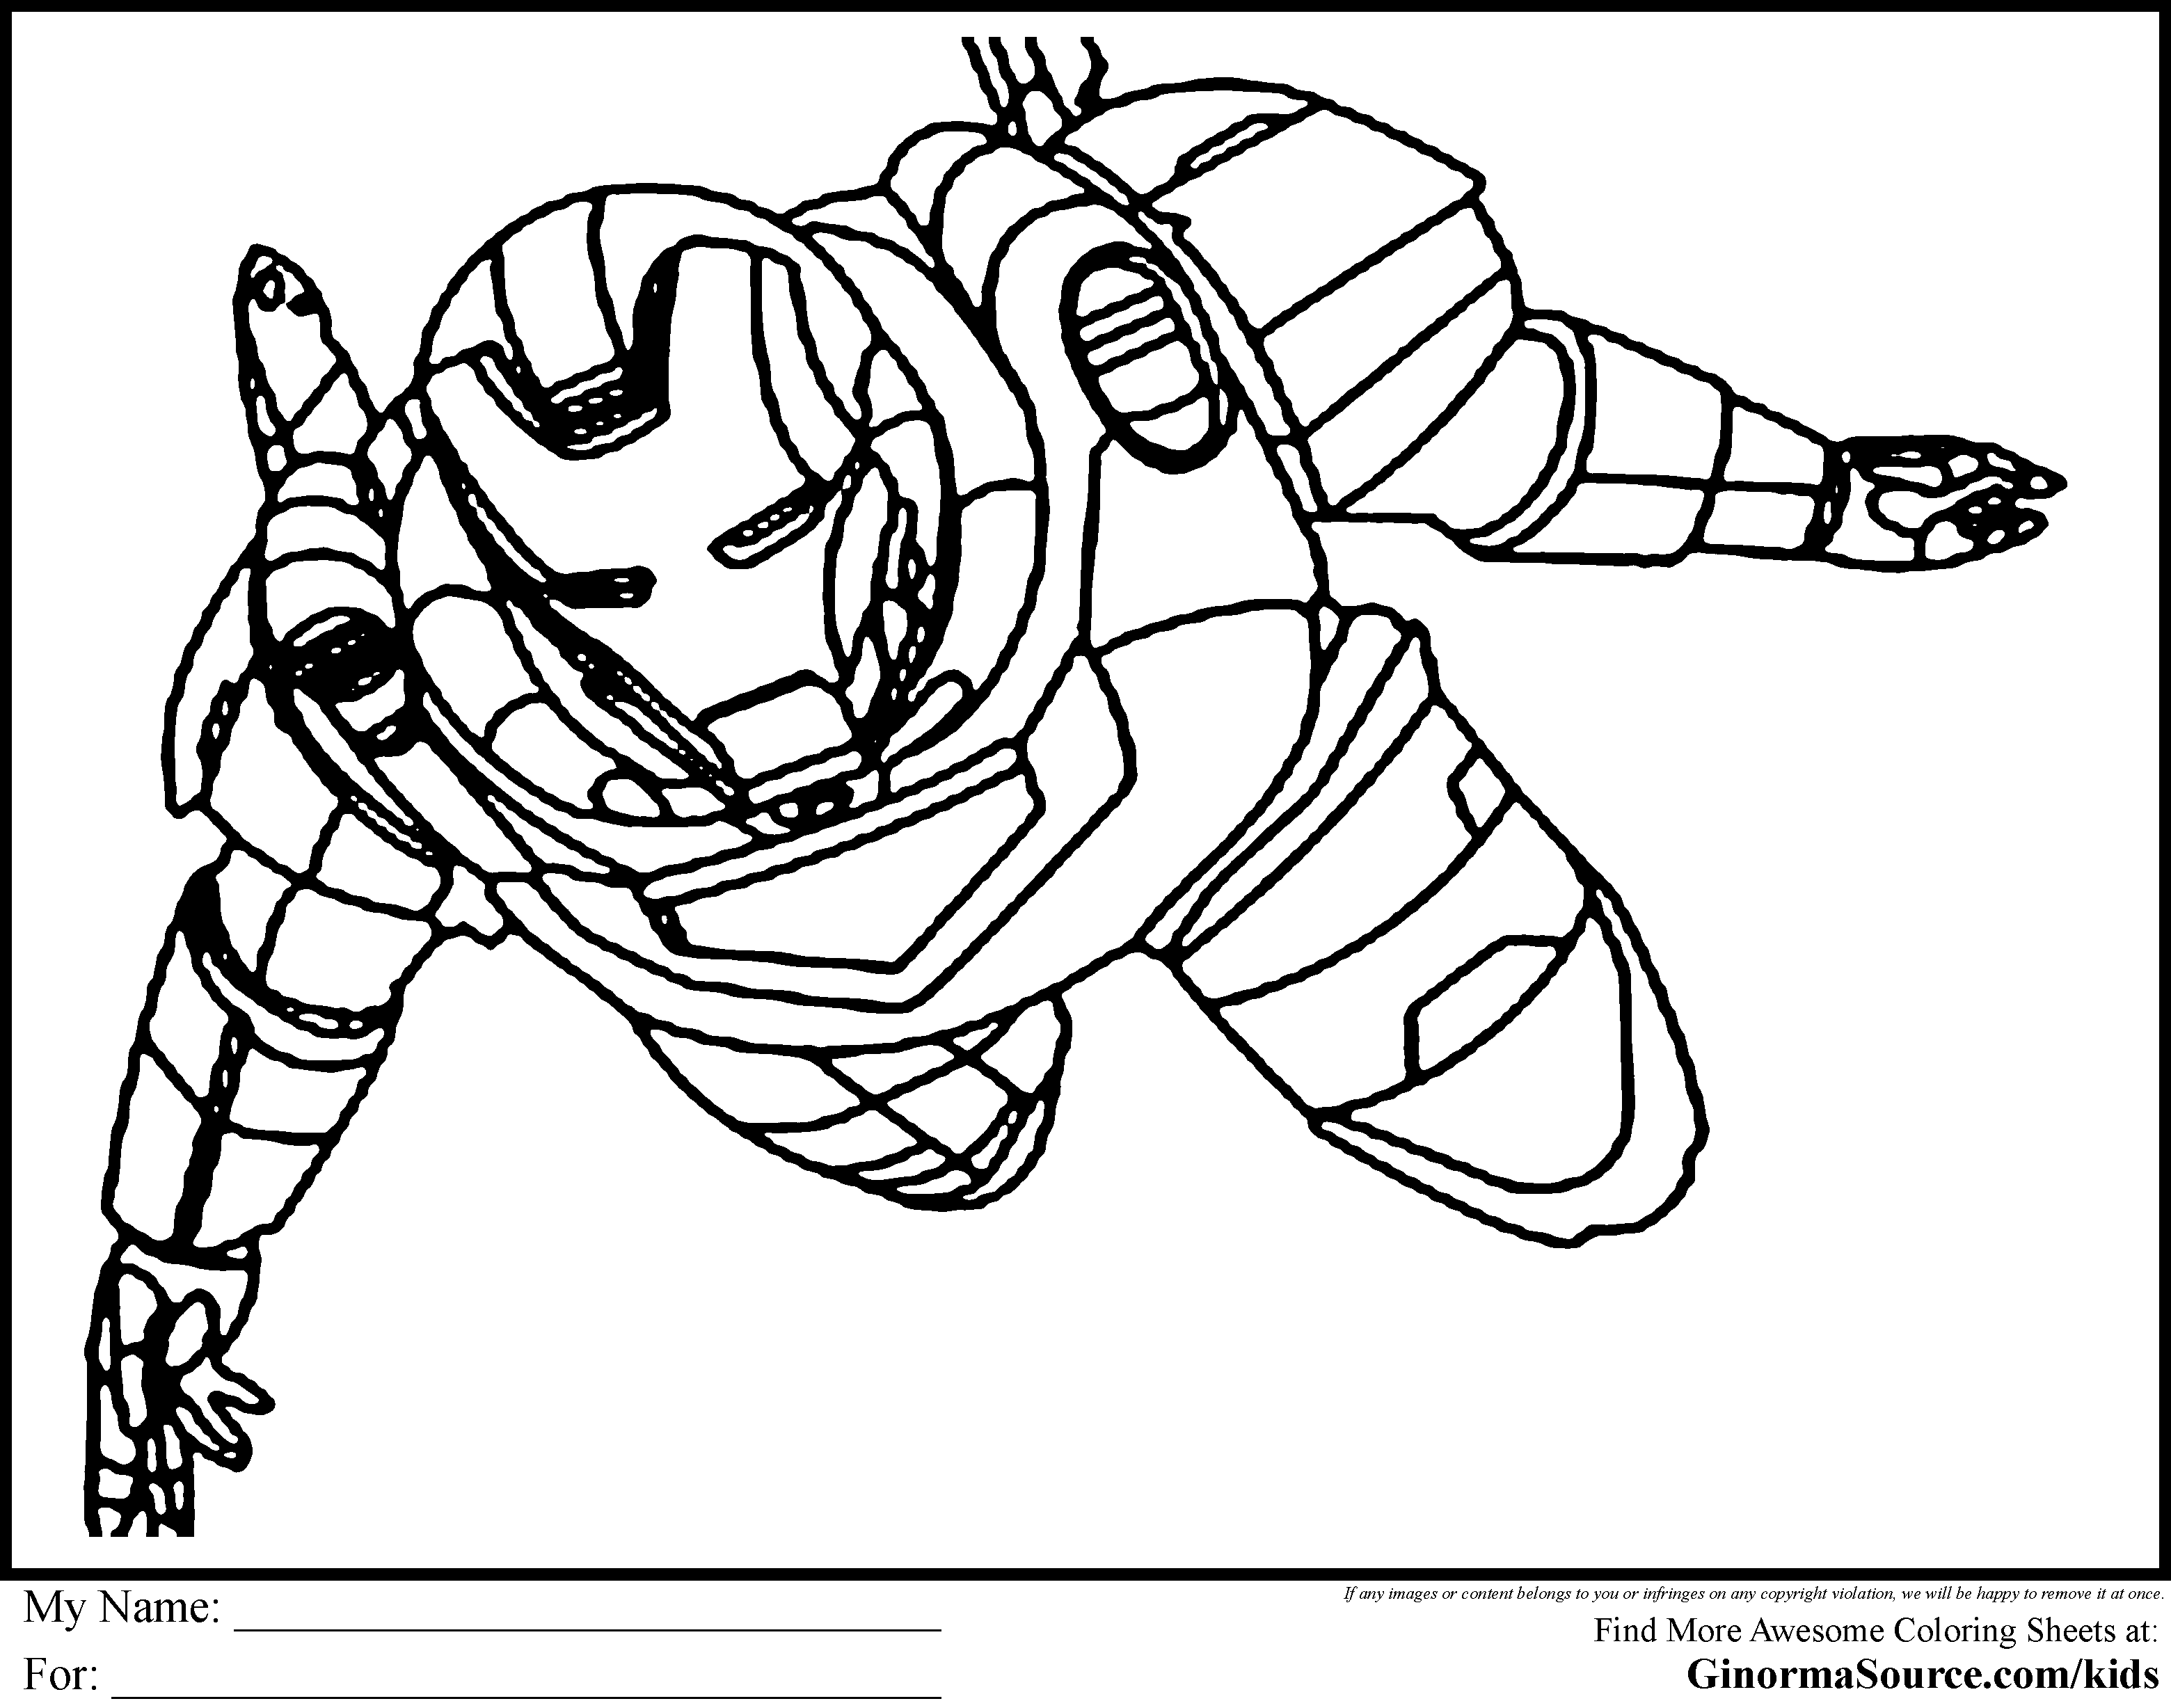 avengers coloring pages to print the avengers coloring pages to download and print for free pages to avengers coloring print 